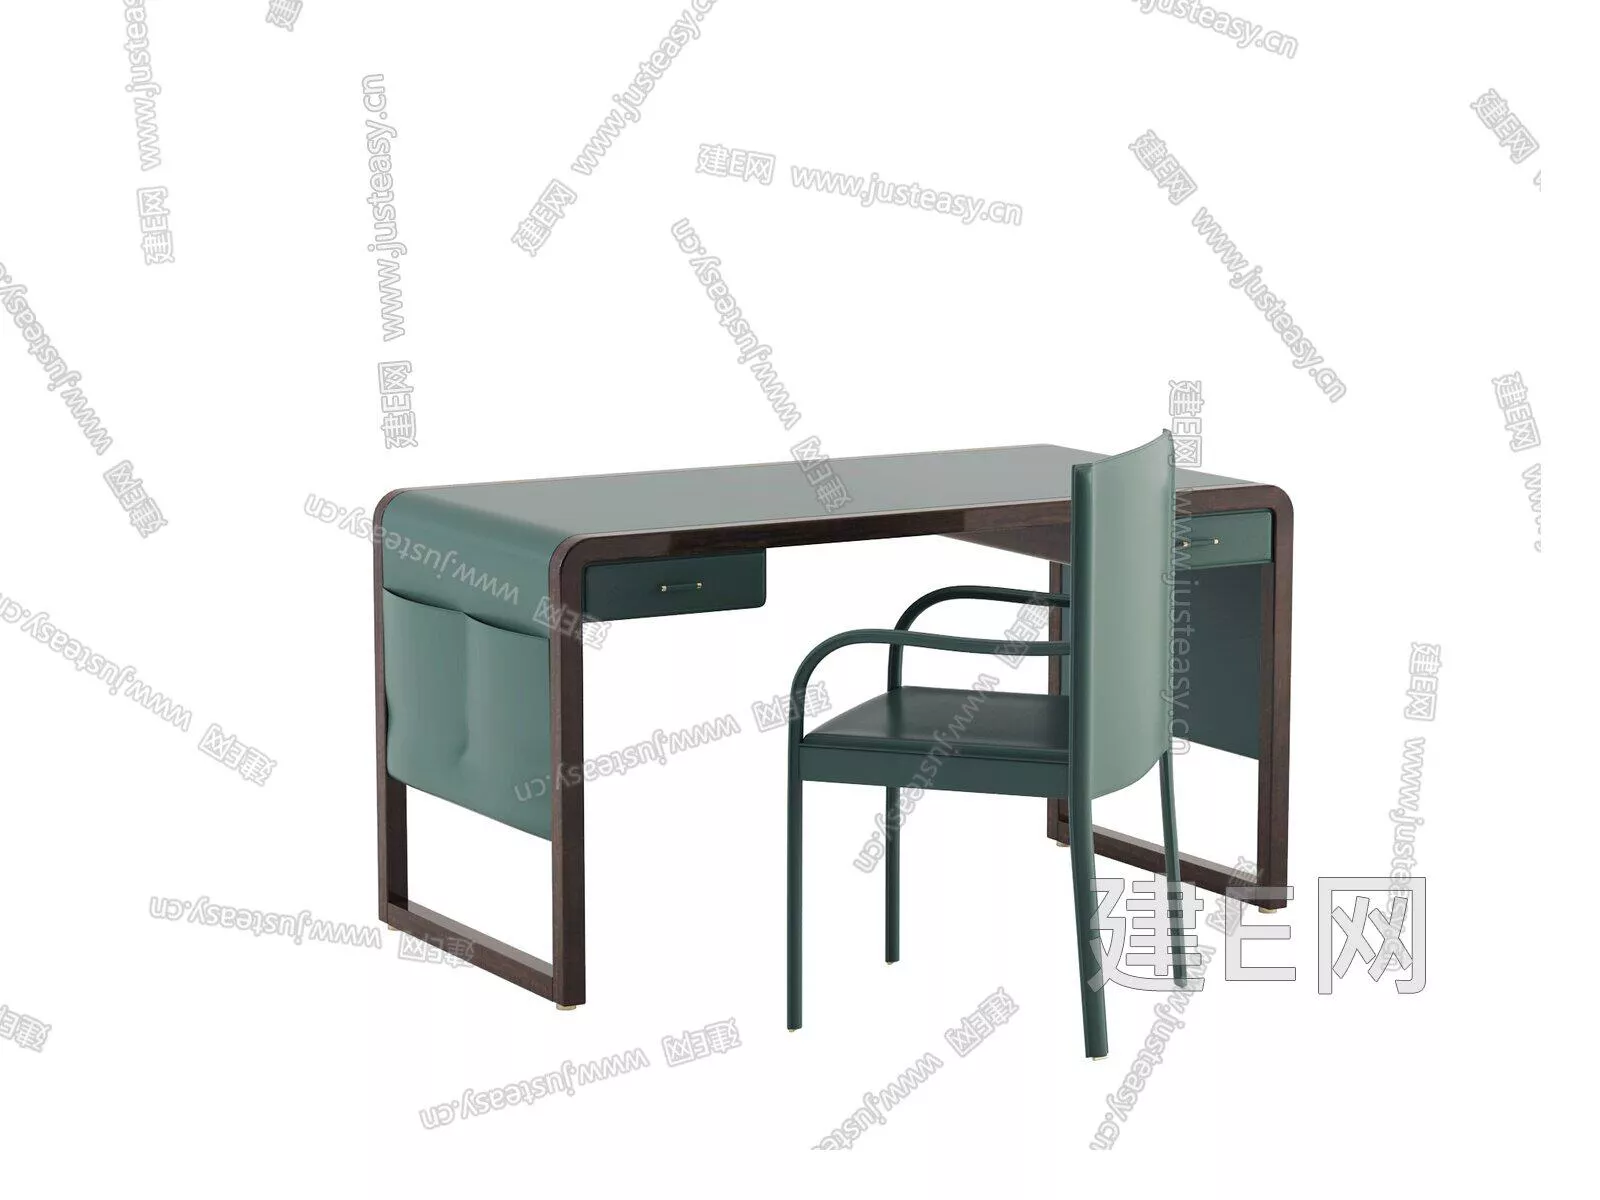 MODERN DESK AND CHAIRS - SKETCHUP 3D MODEL - ENSCAPE - 104941595